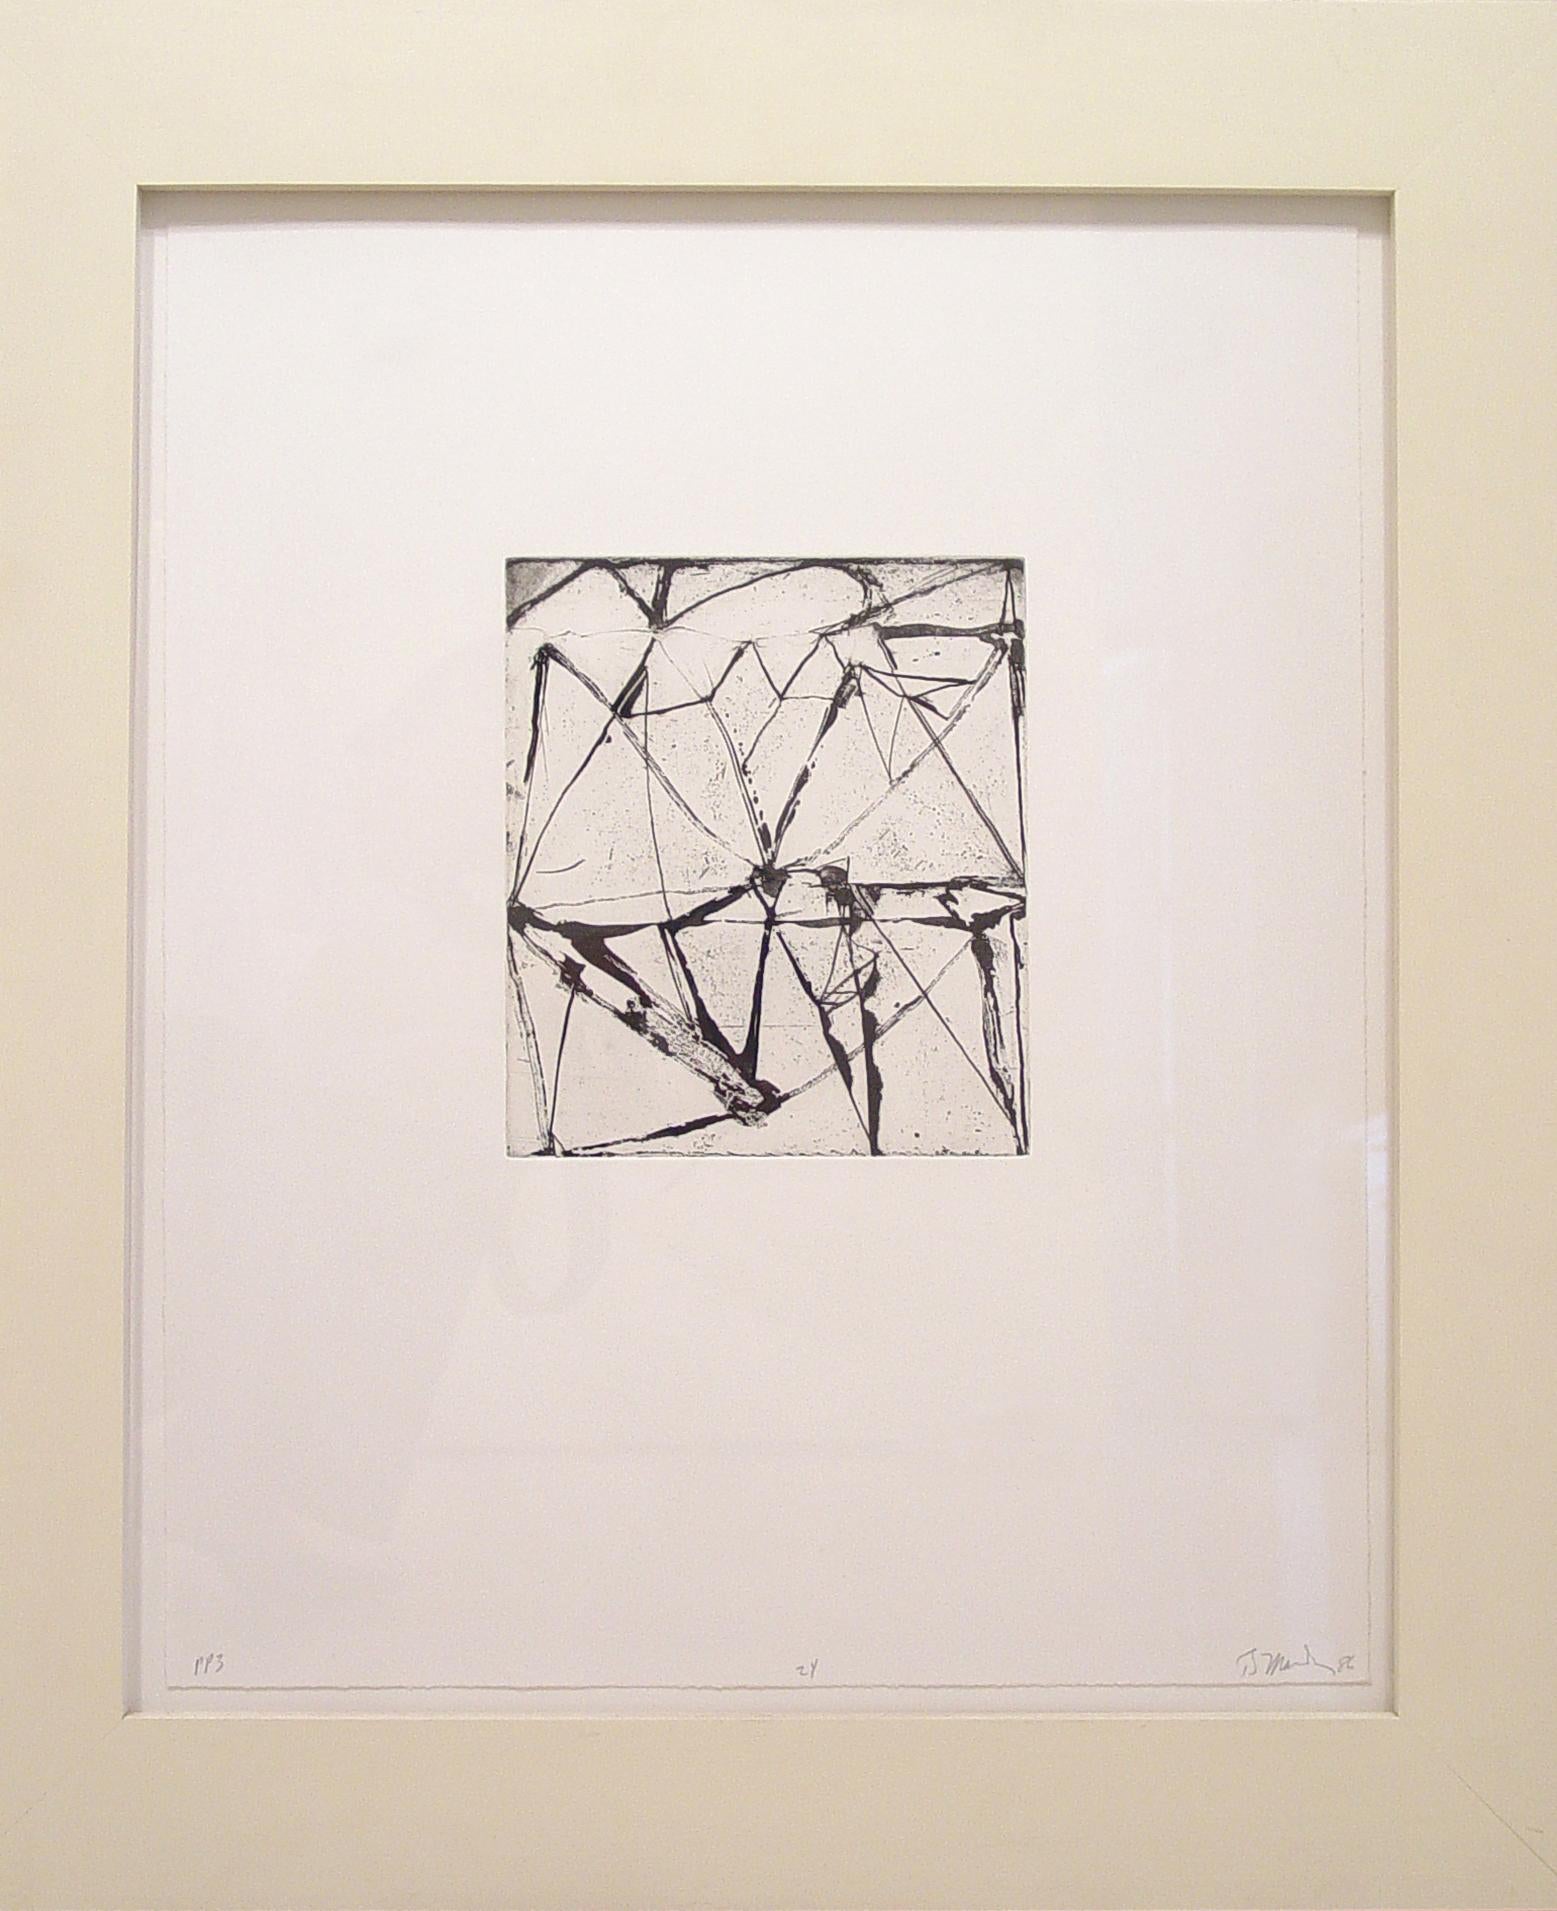 Brice Marden, Etchings to Rexroth #24, 1986, etching and sugarlift aquatint For Sale 1